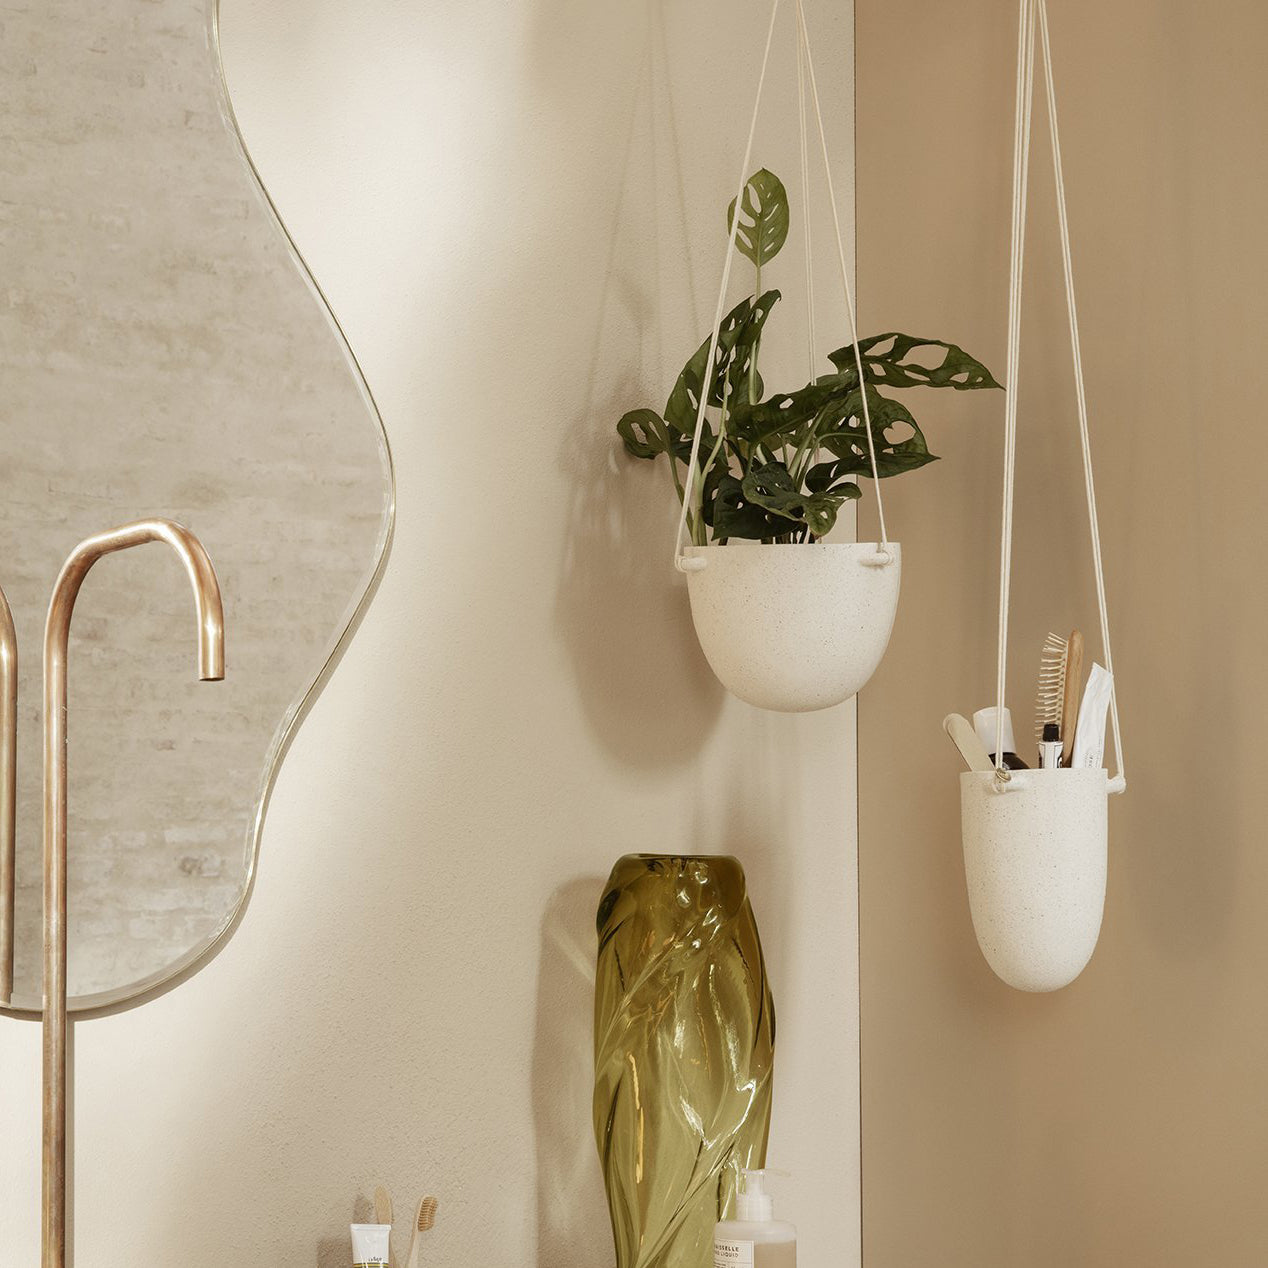 Speckle Hanging Pot - Off-White